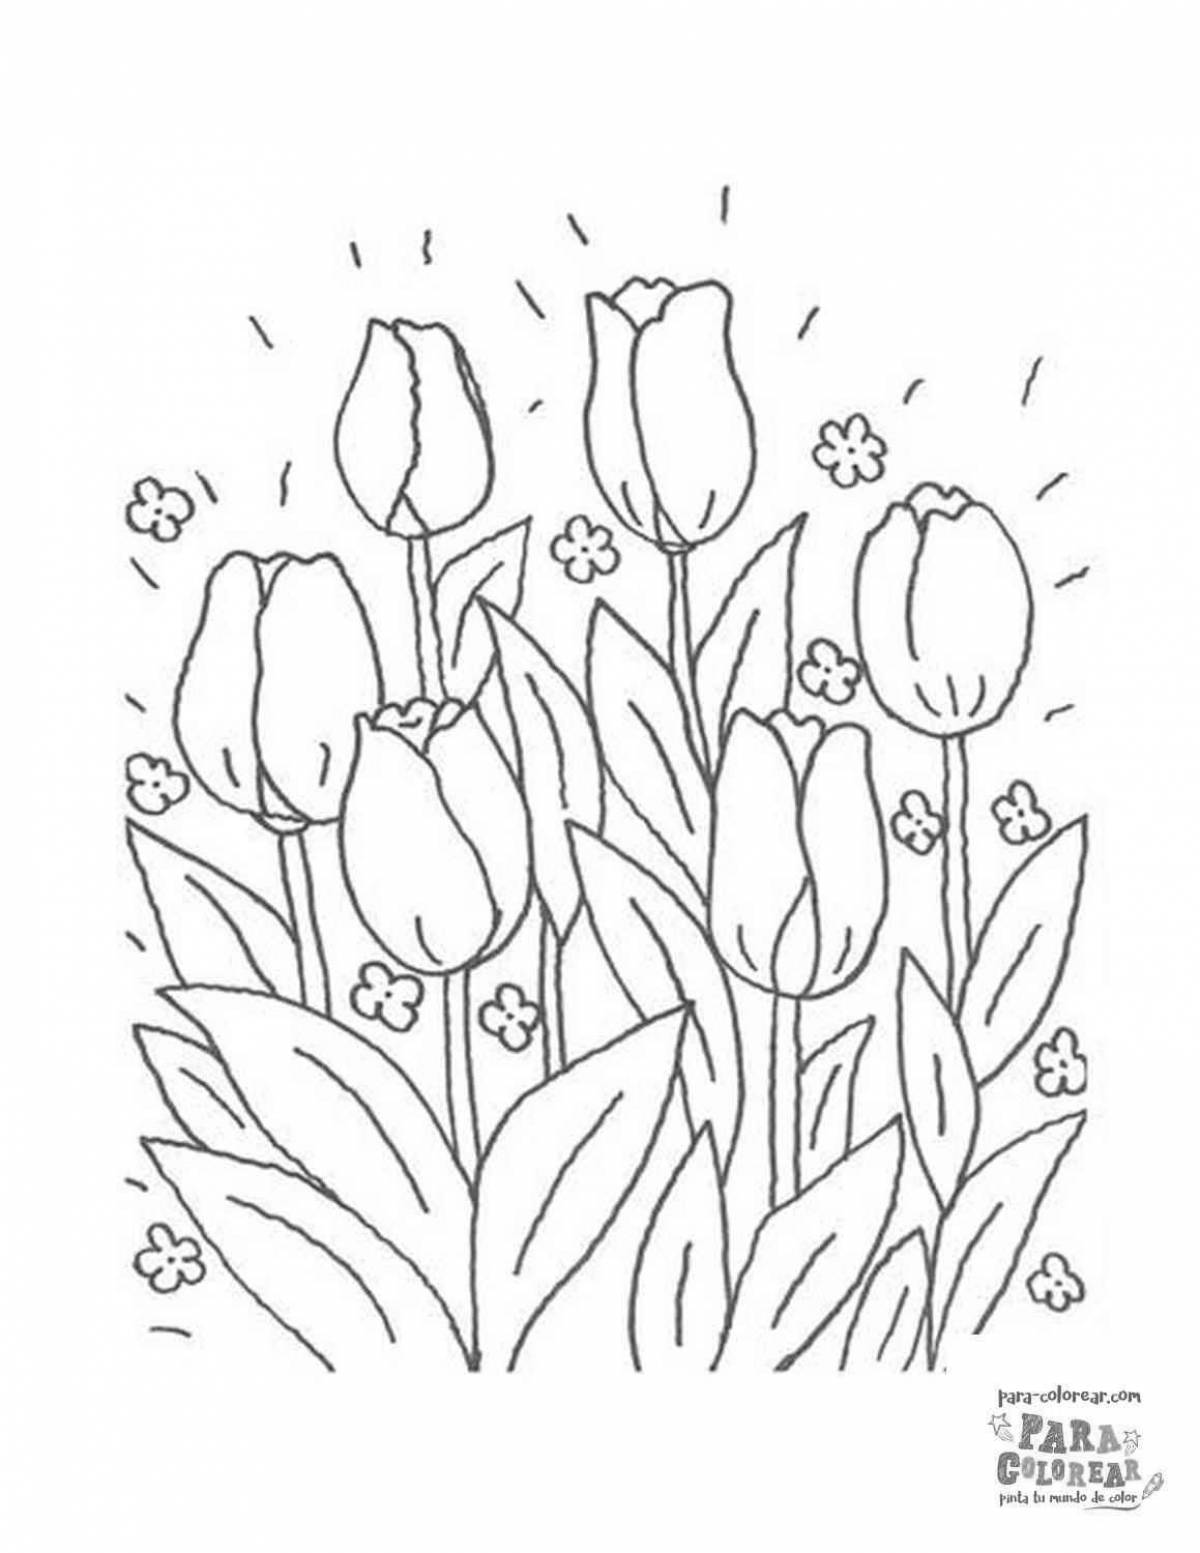 Merry tulips March 8 coloring pages